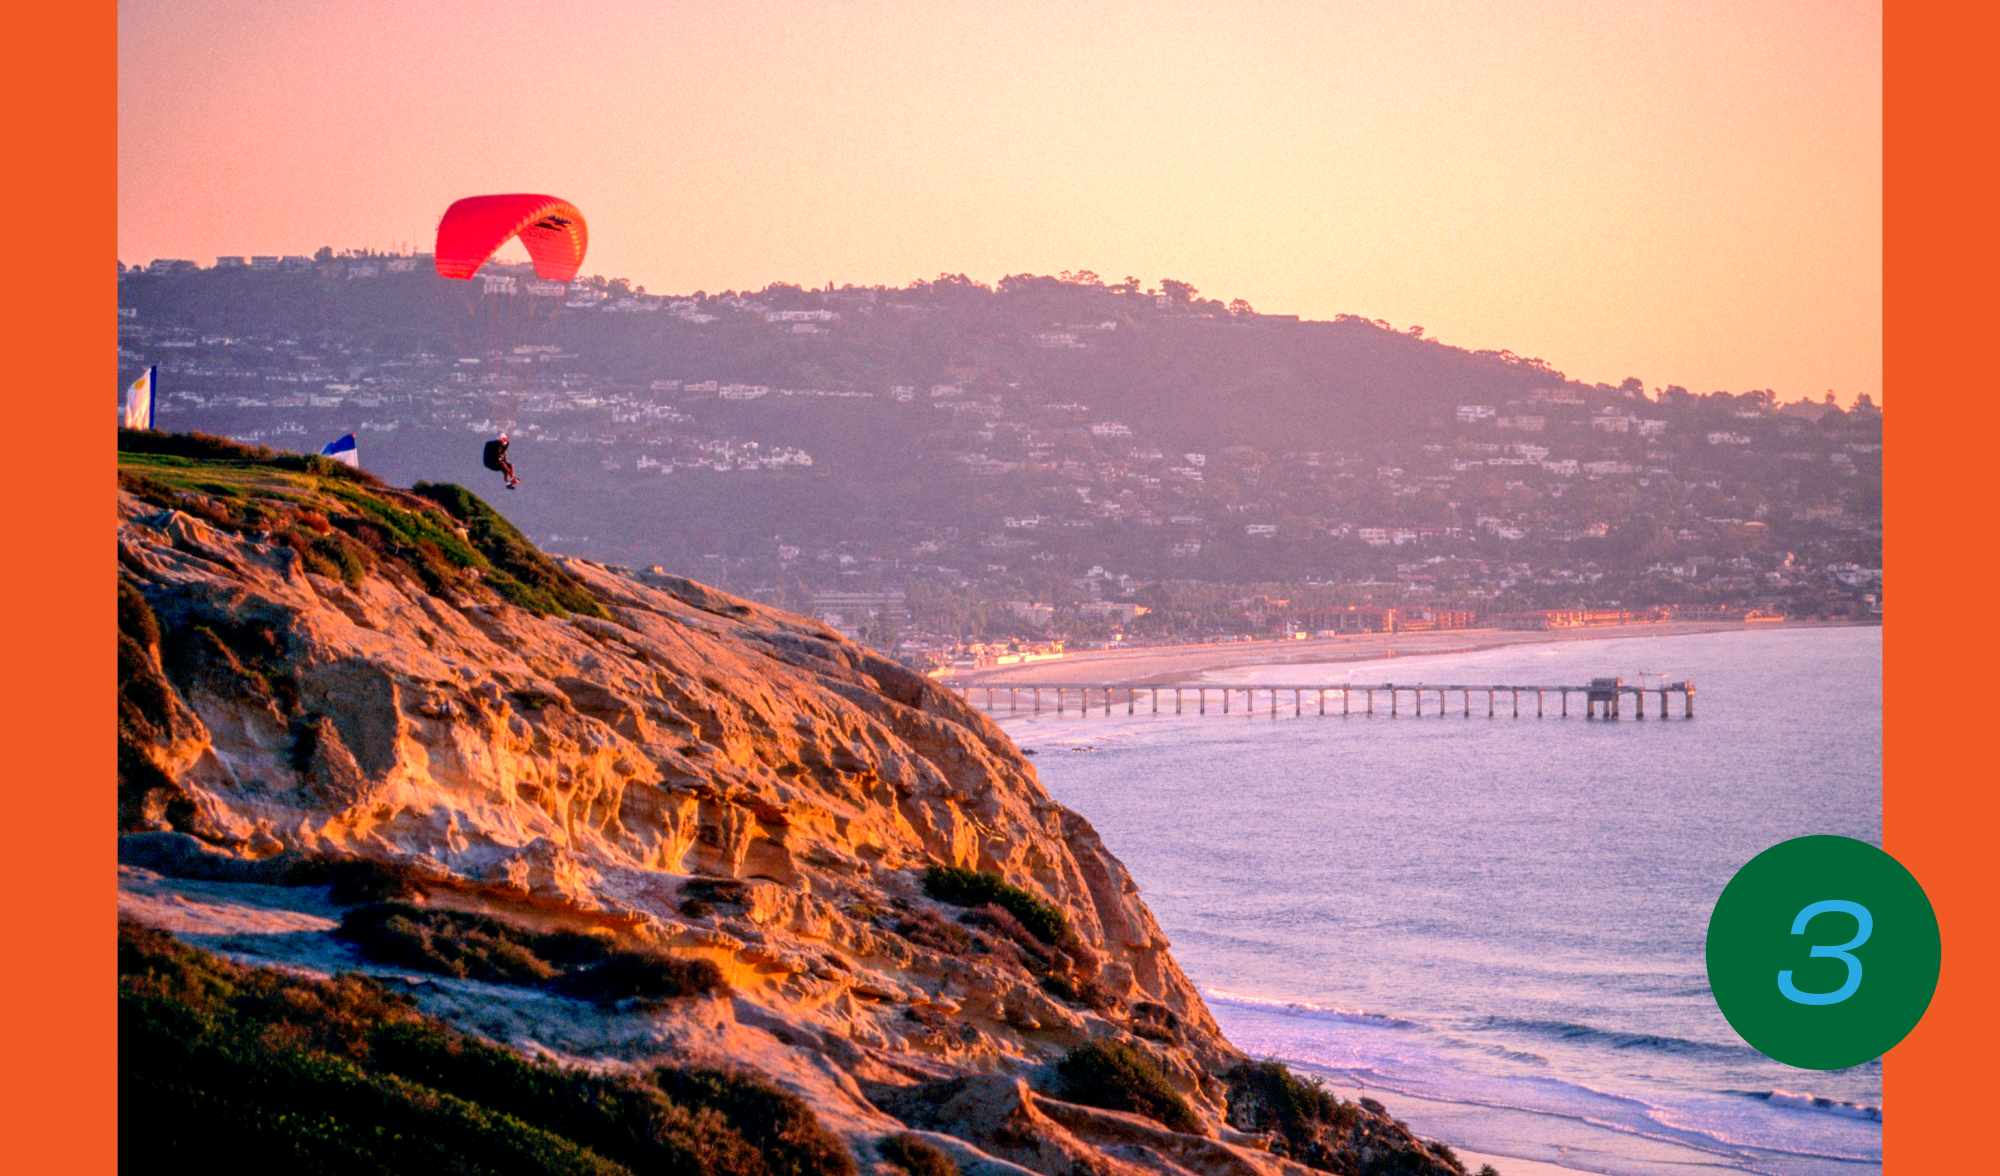 A hang glider soars above an oceanfront cliff at sunset at the Torrey Pines Gliderport 